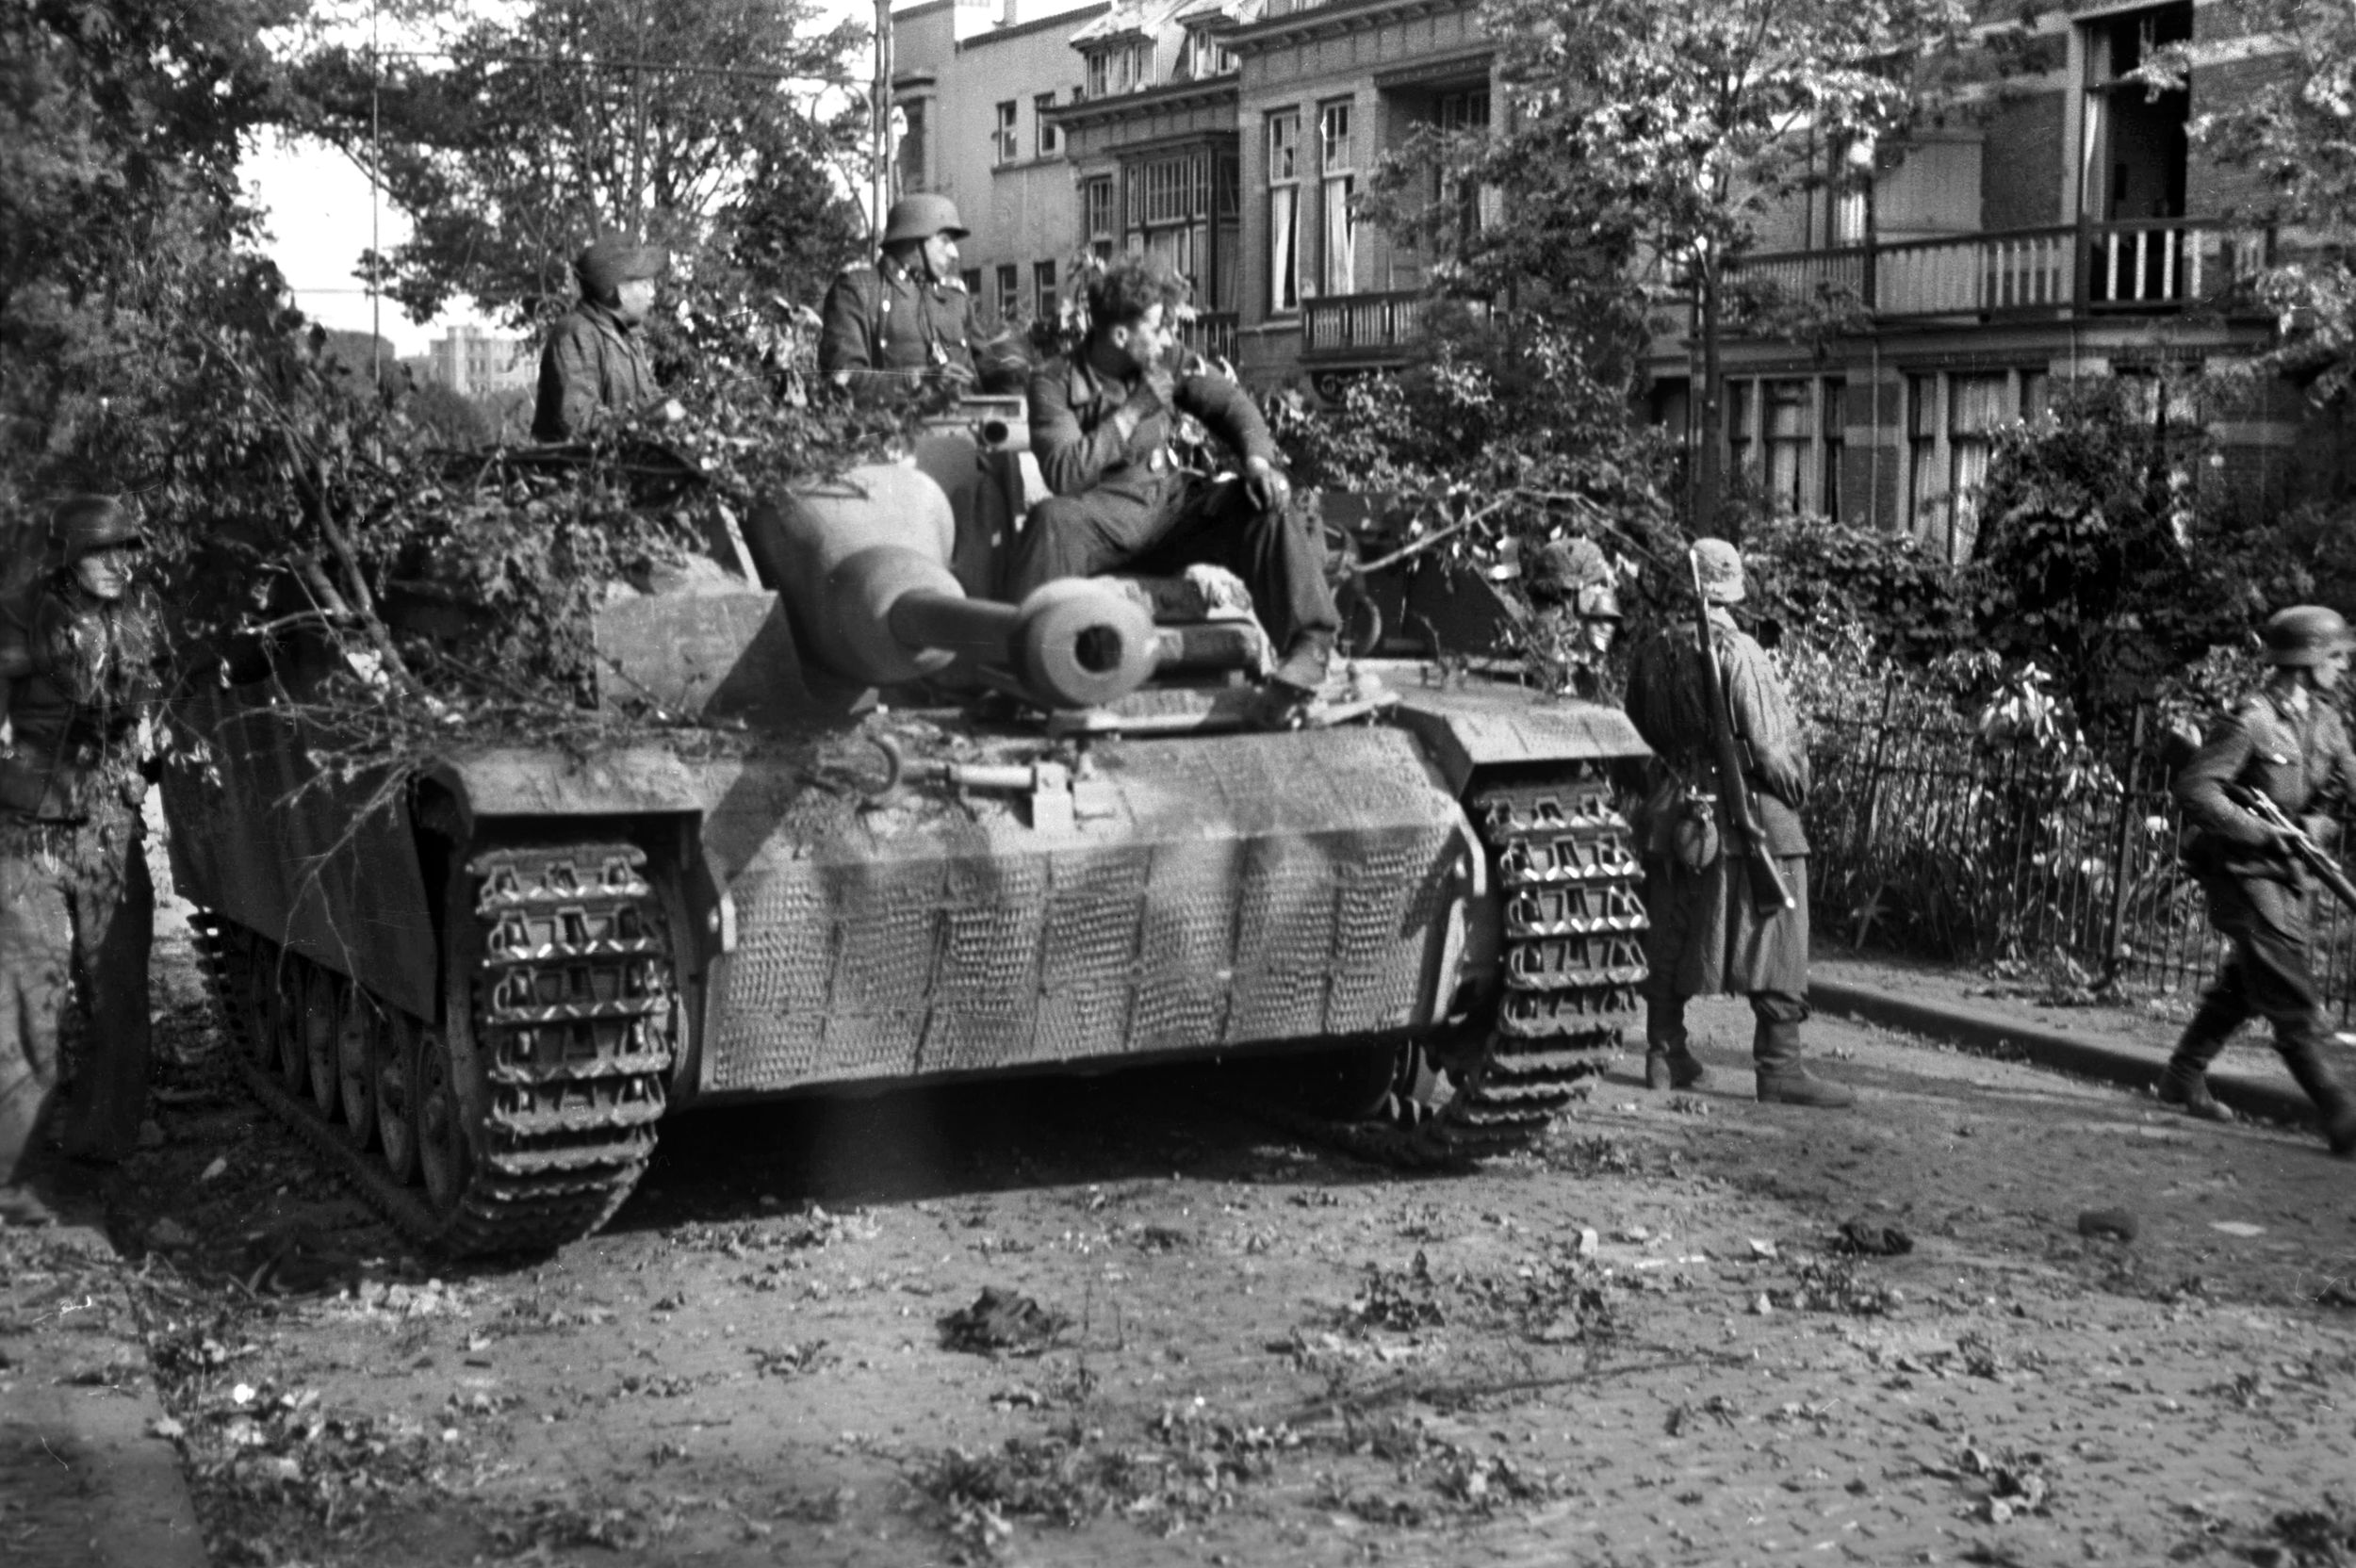 German soldiers sit atop a Sturmgeschutz III self-propelled assault gun in a Dutch town while other troops sweep the area. These armored vehicles were among those that British commanders did not believe constituted a threat to Operation Market-Garden.